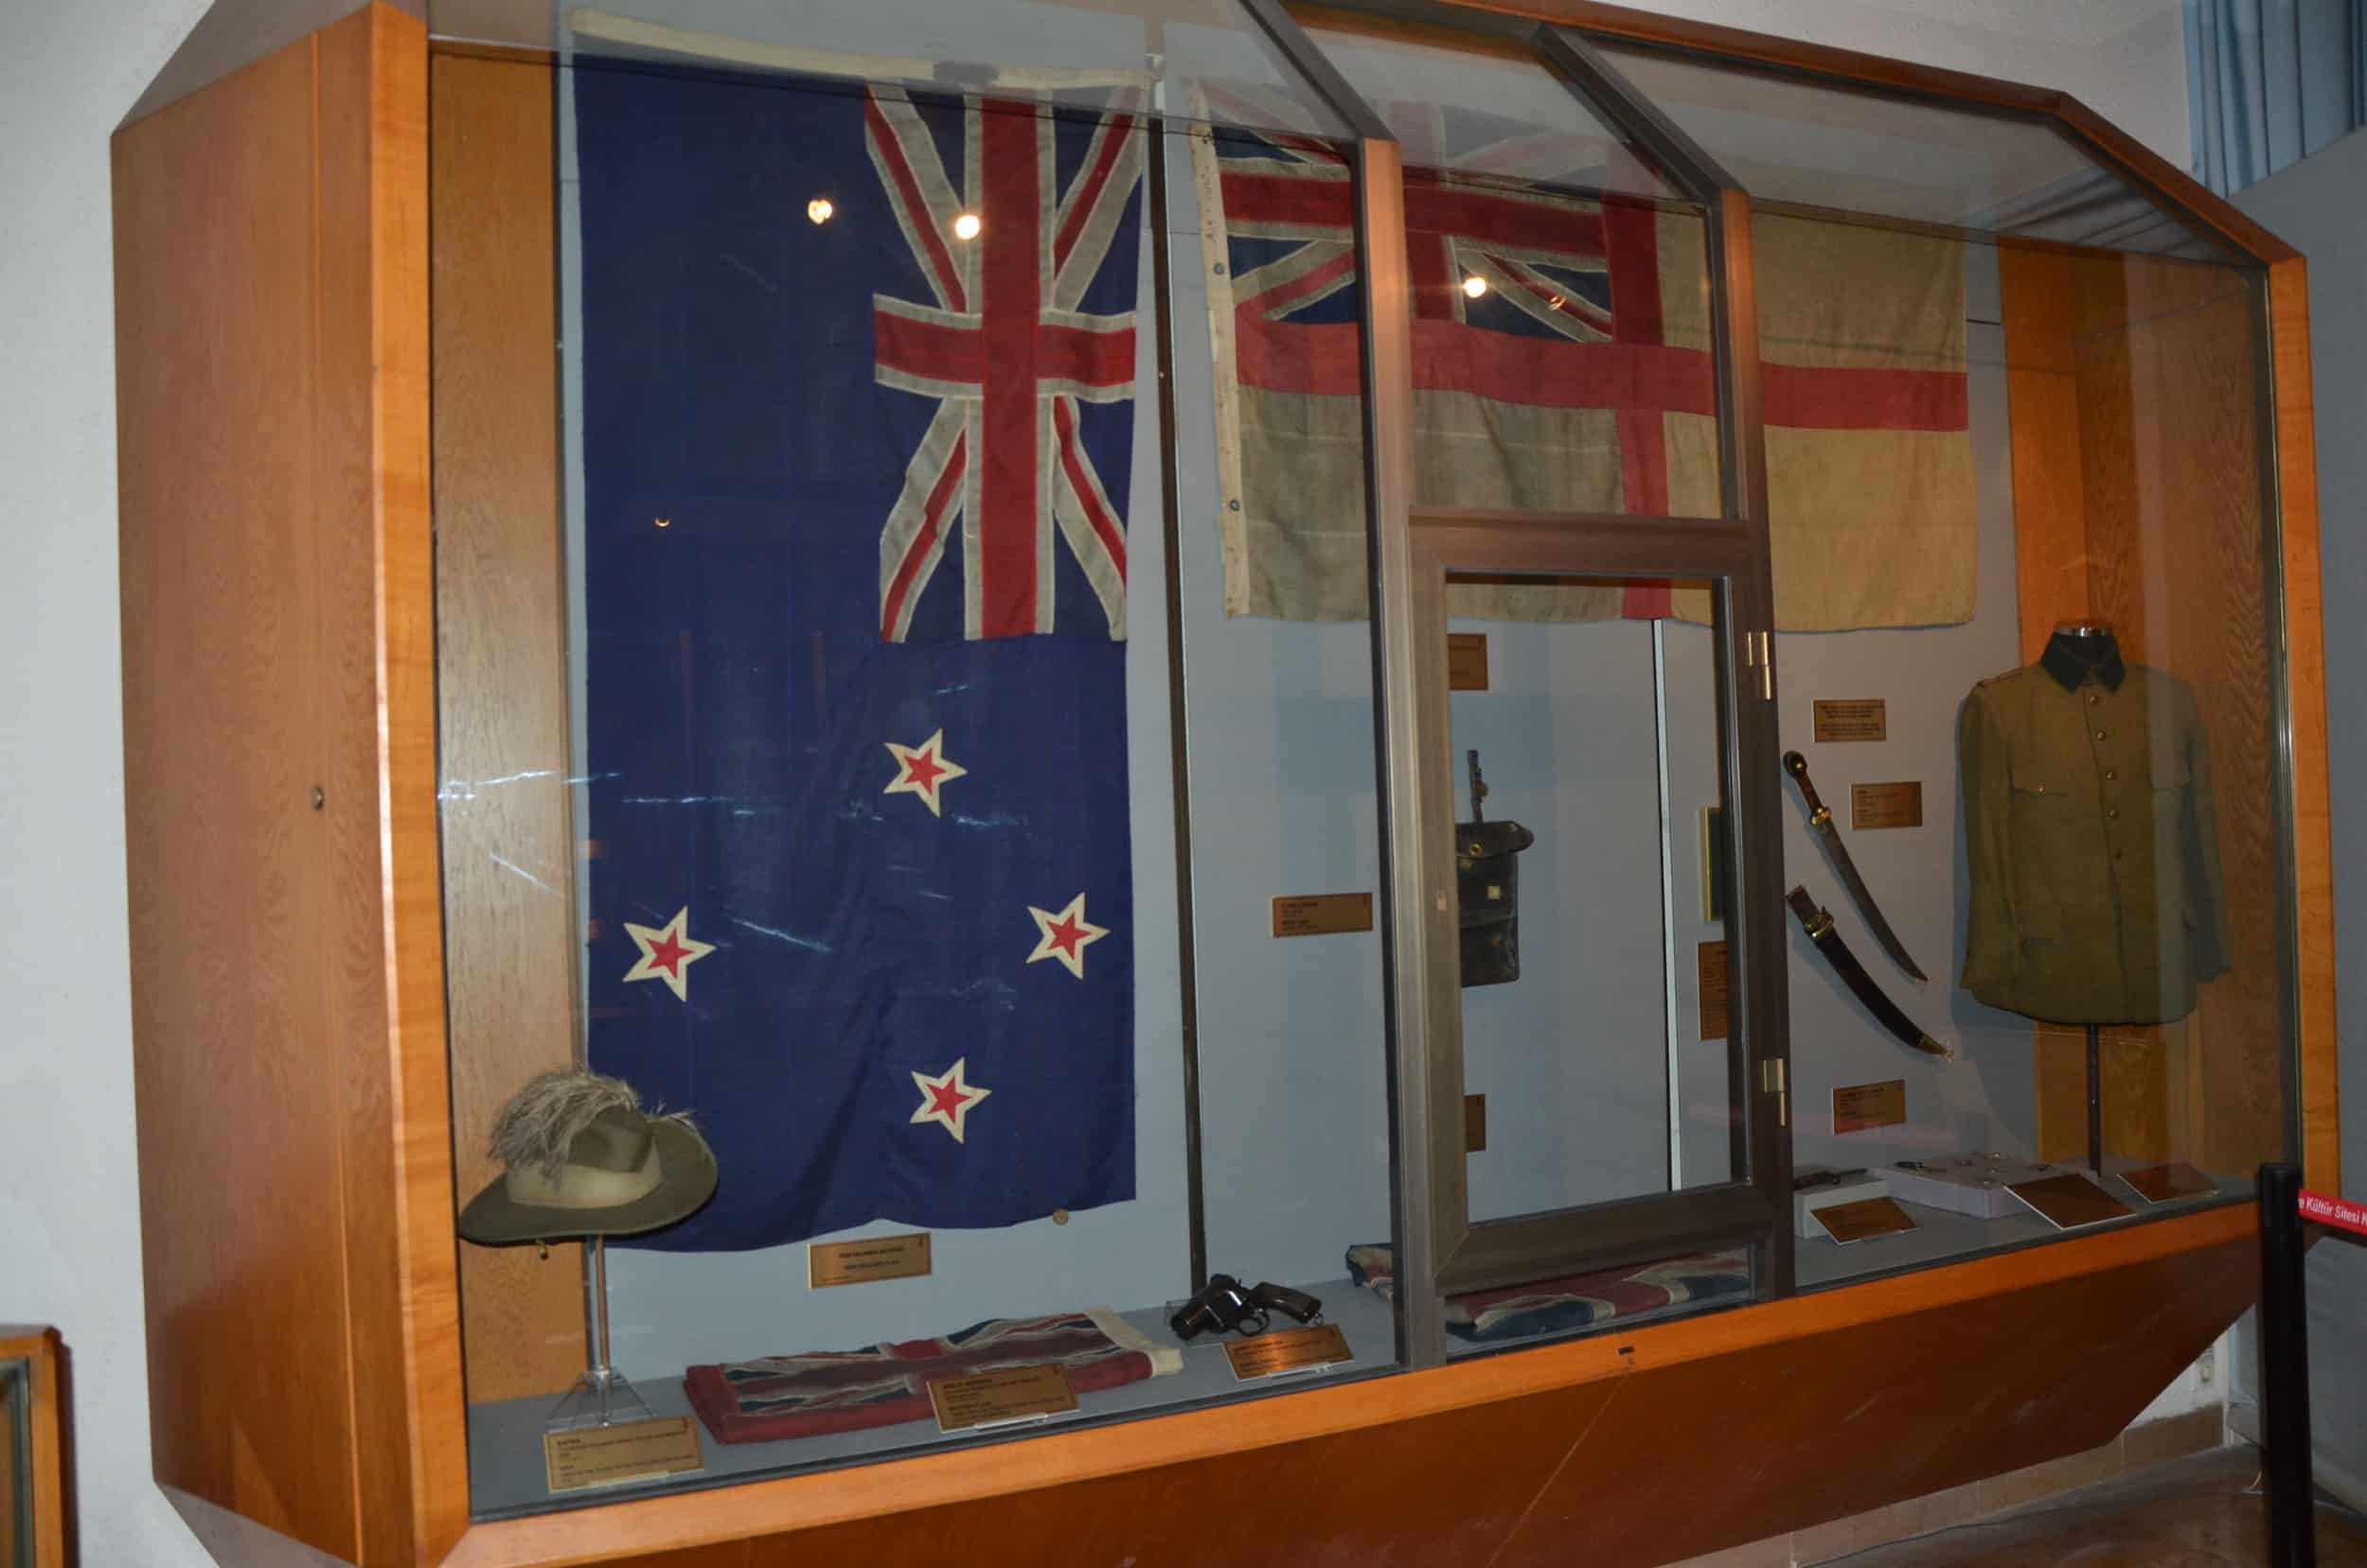 Items from the Gallipoli Campaign at the Harbiye Military Museum in Istanbul, Turkey